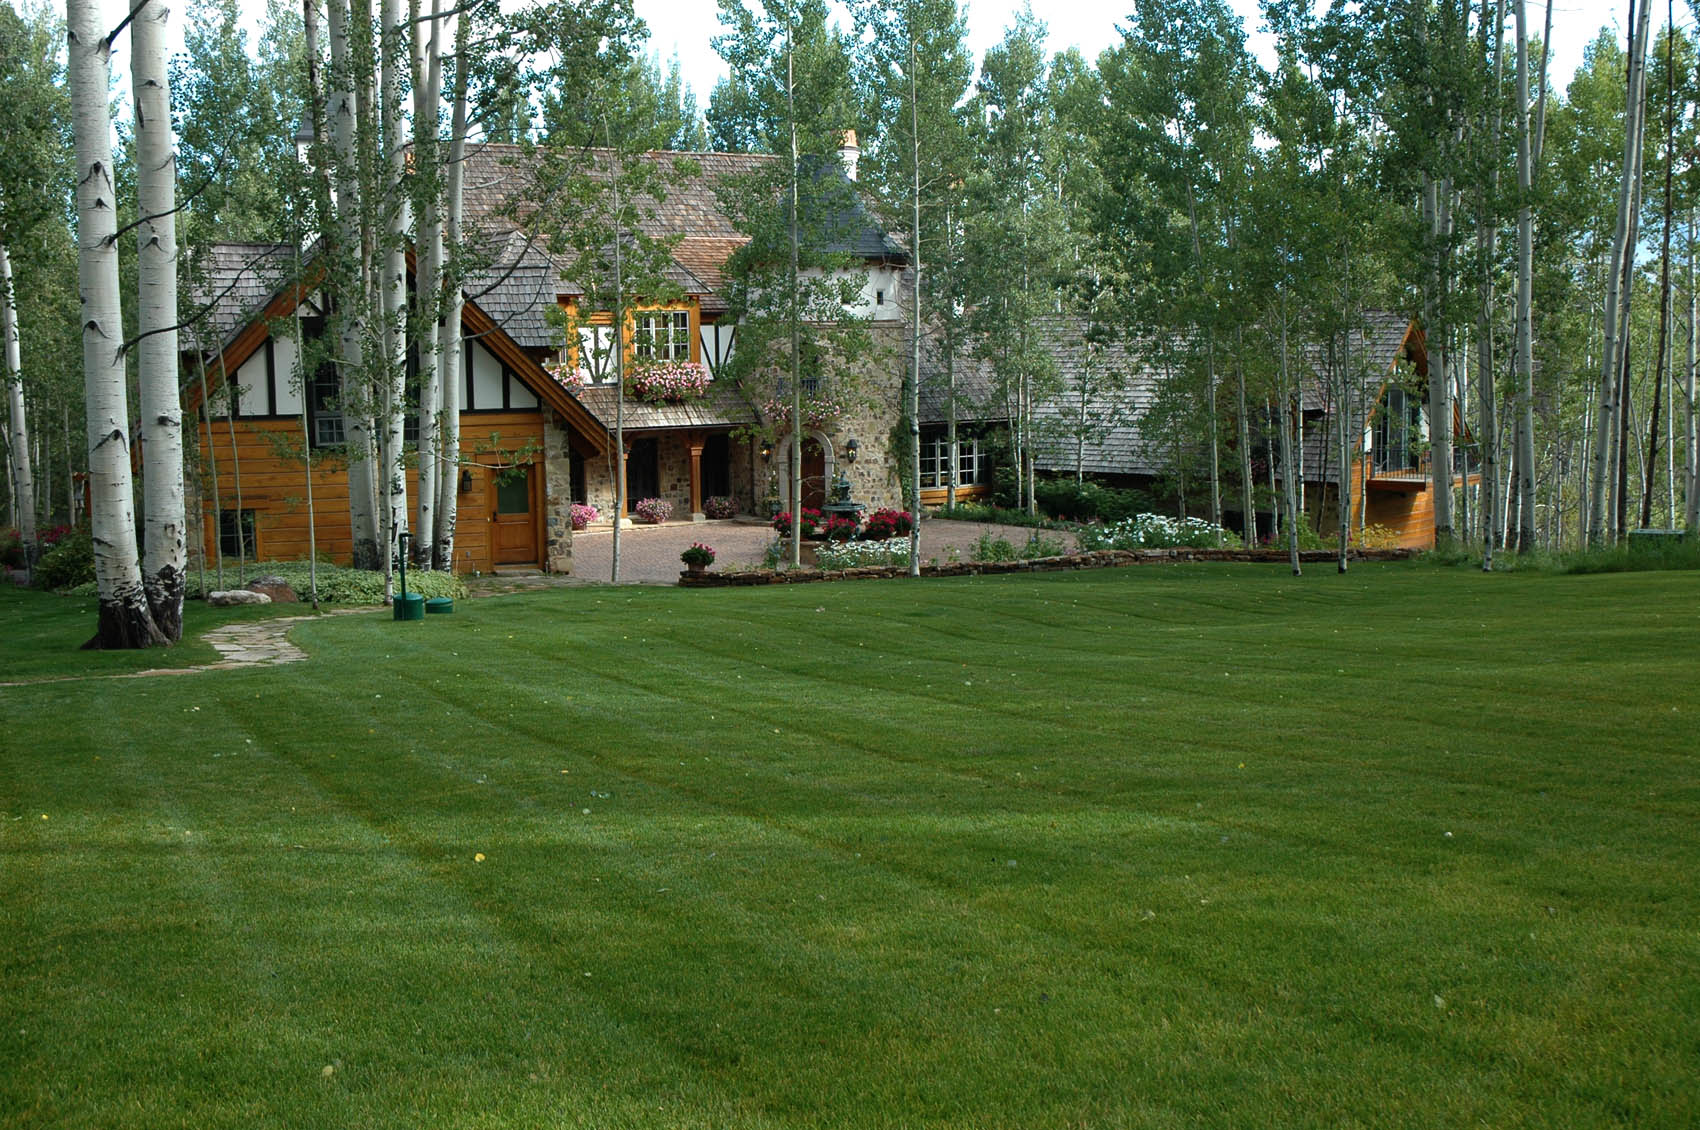 A large, manicured lawn leads to a charming house with timber and stone features, nestled among tall, slender birch trees in a serene setting.